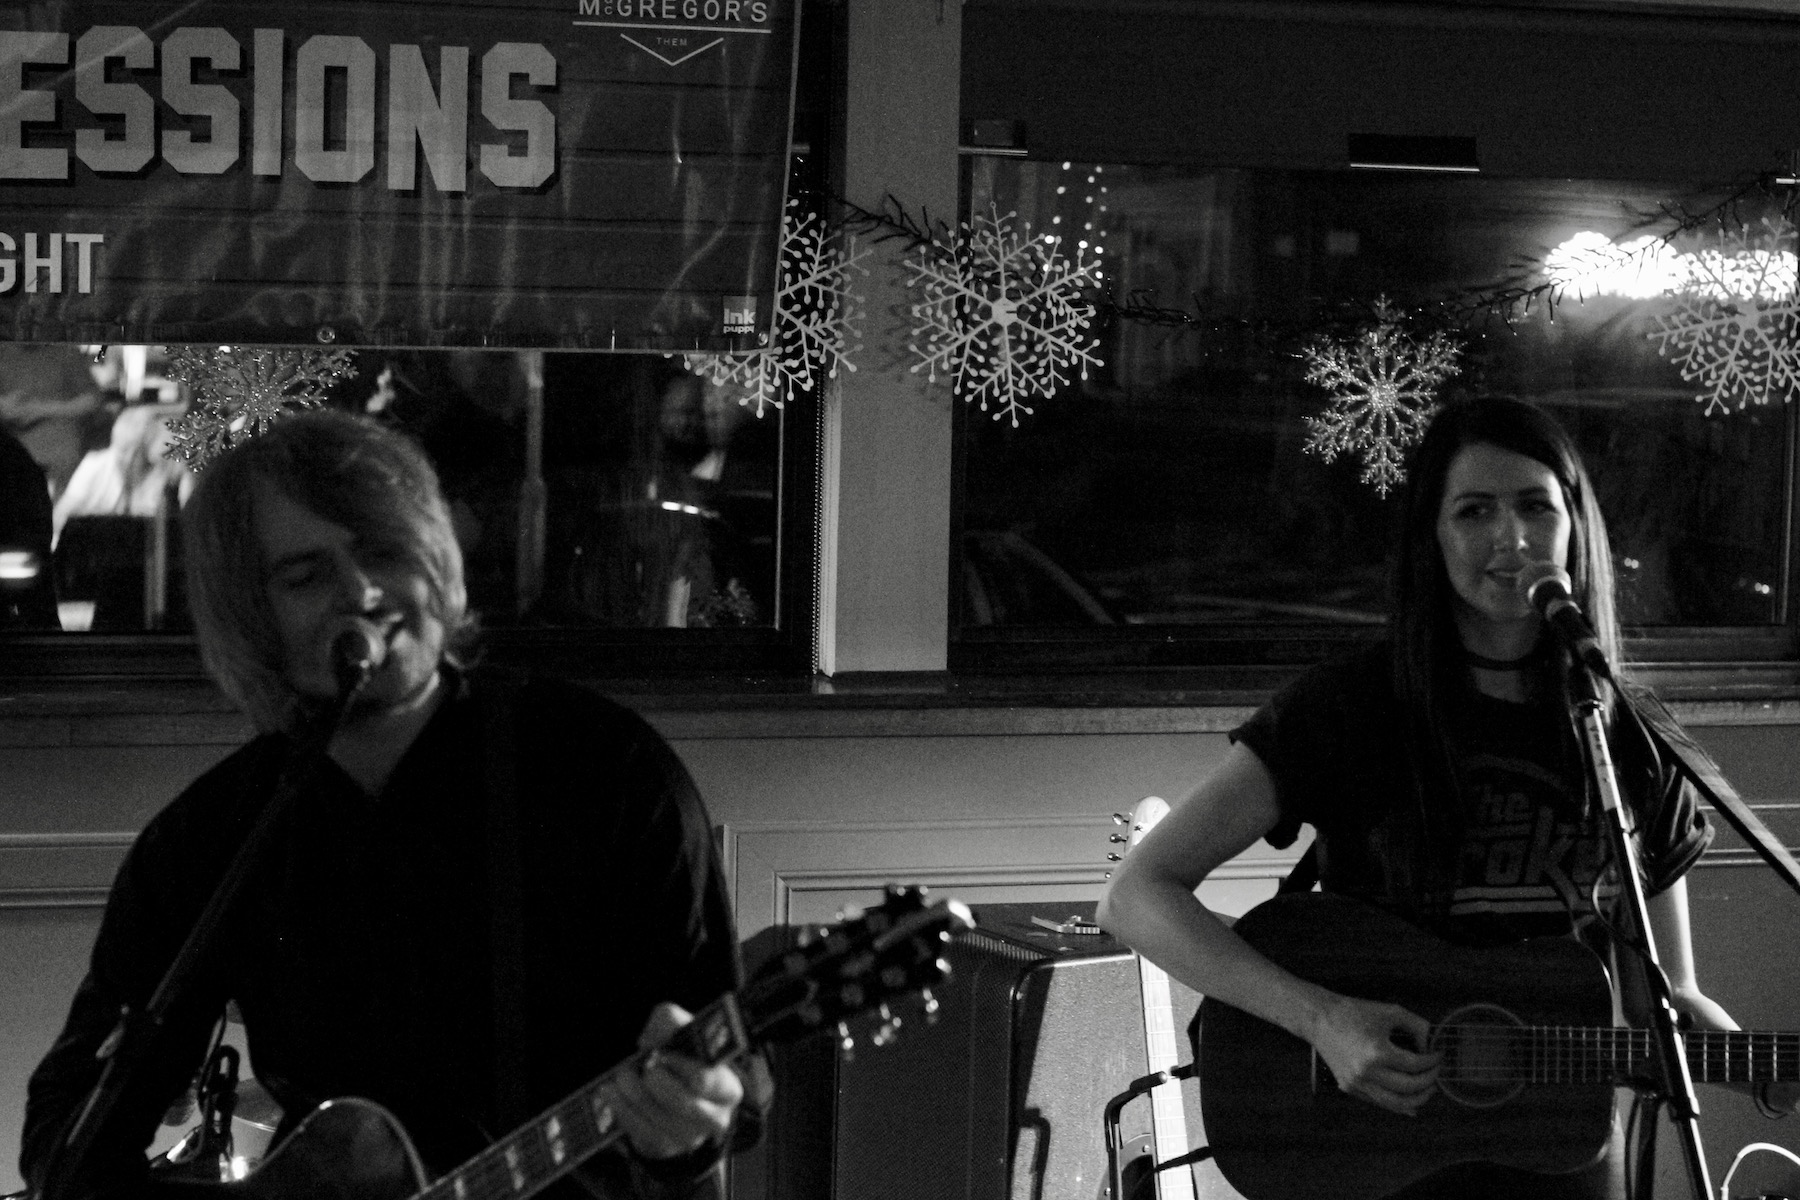 Lauren MacKenzie at The Porch Sessions Inverness December 20183046 - The Porch Sessions, 8/12/2018 - Images